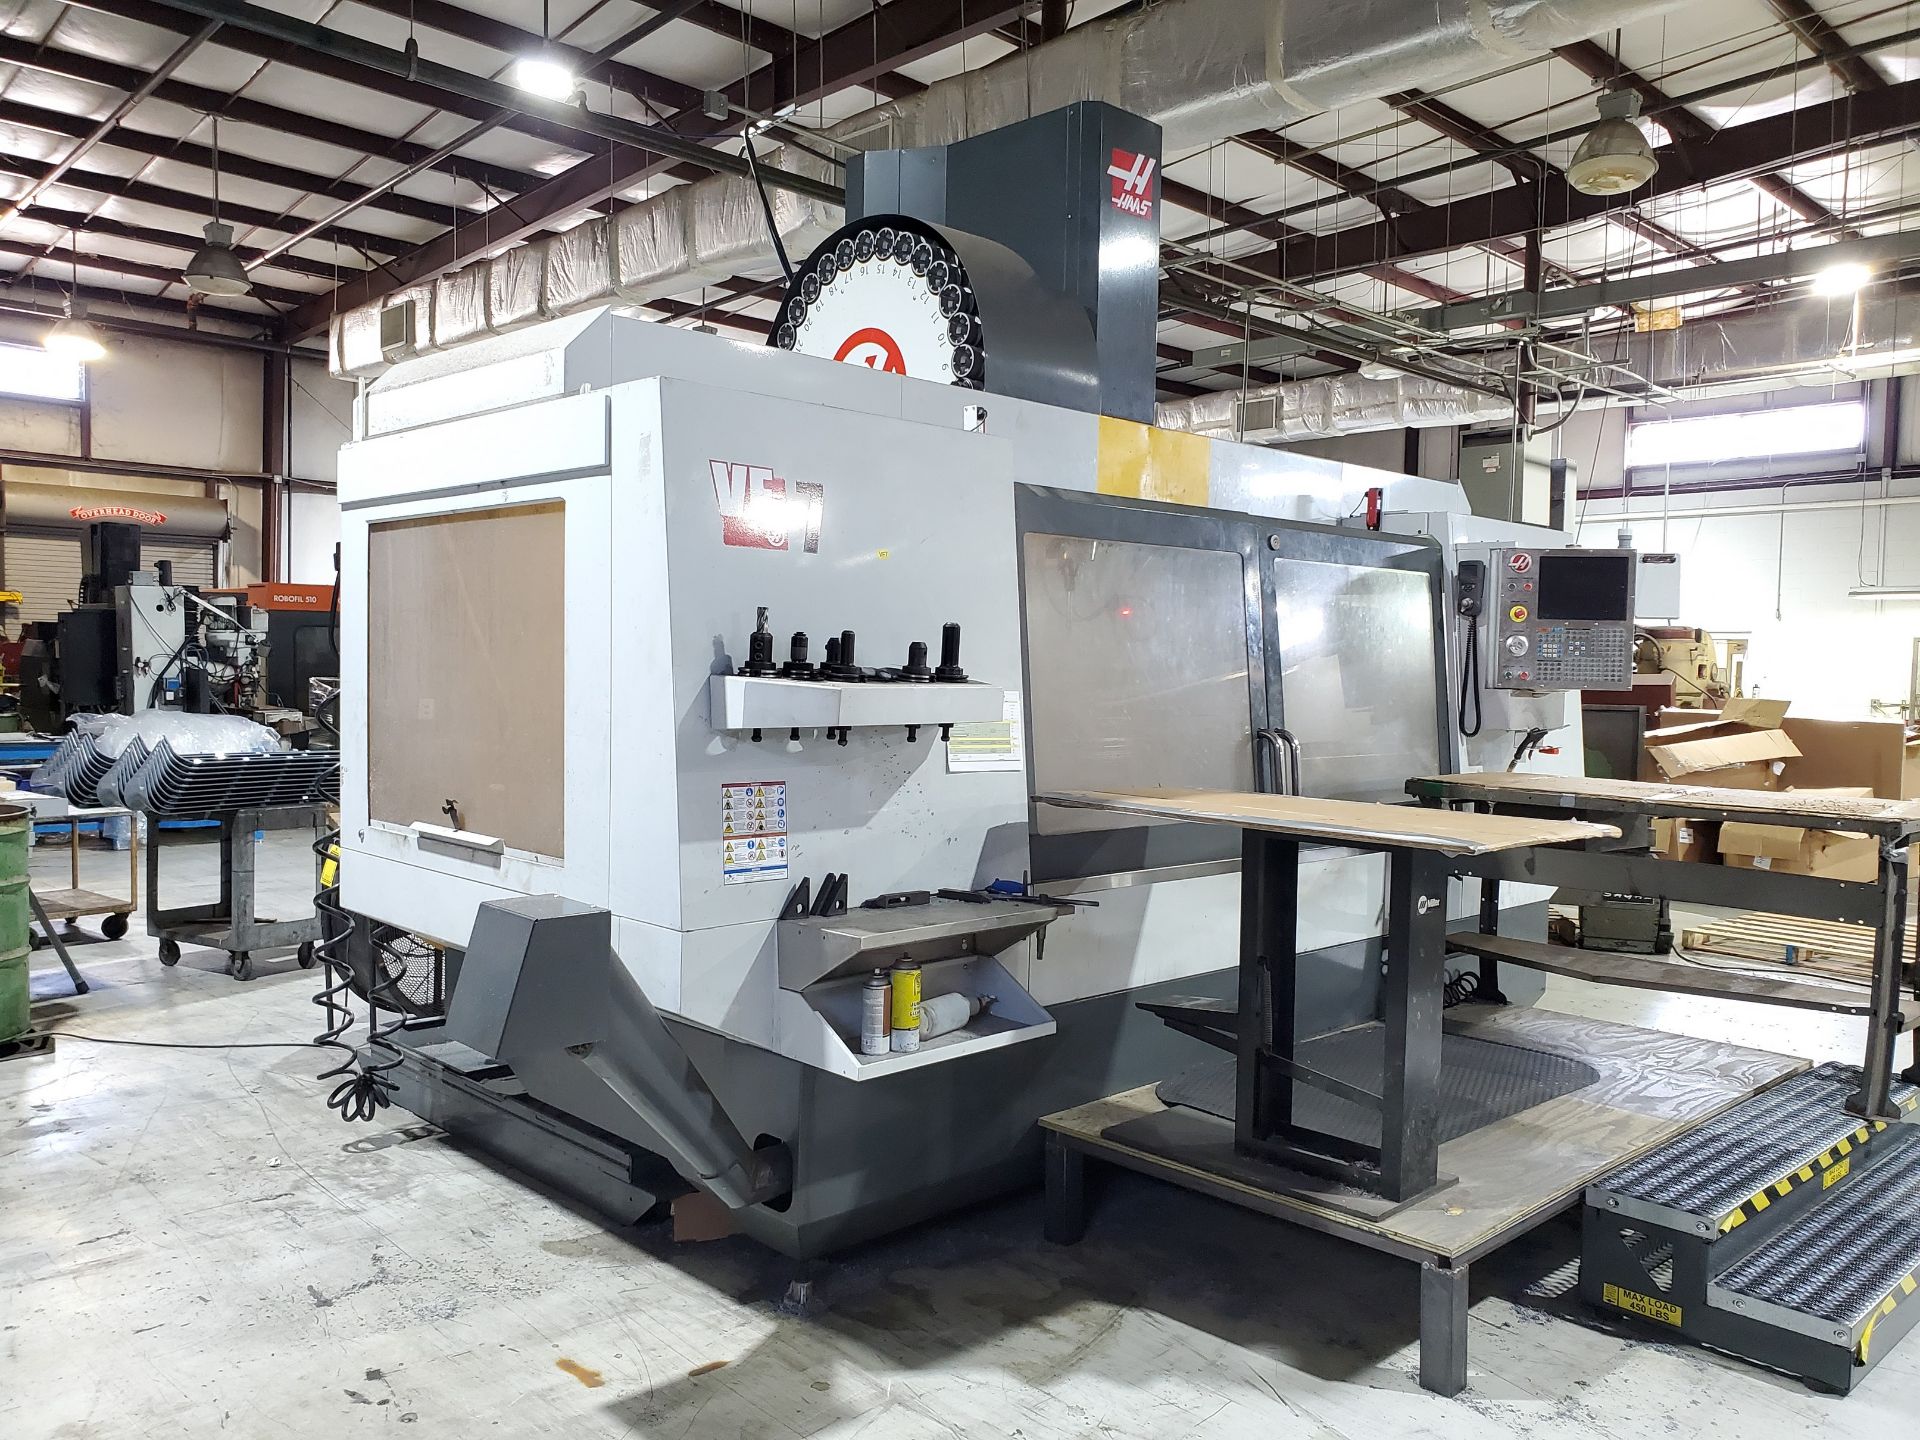 2013 HAAS VF7 CNC VERTICAL MACHINING CENTER, S/N 1104319, 84'' X 28'' TABLE, THROUGH SPINDLE COOLANT - Image 6 of 27